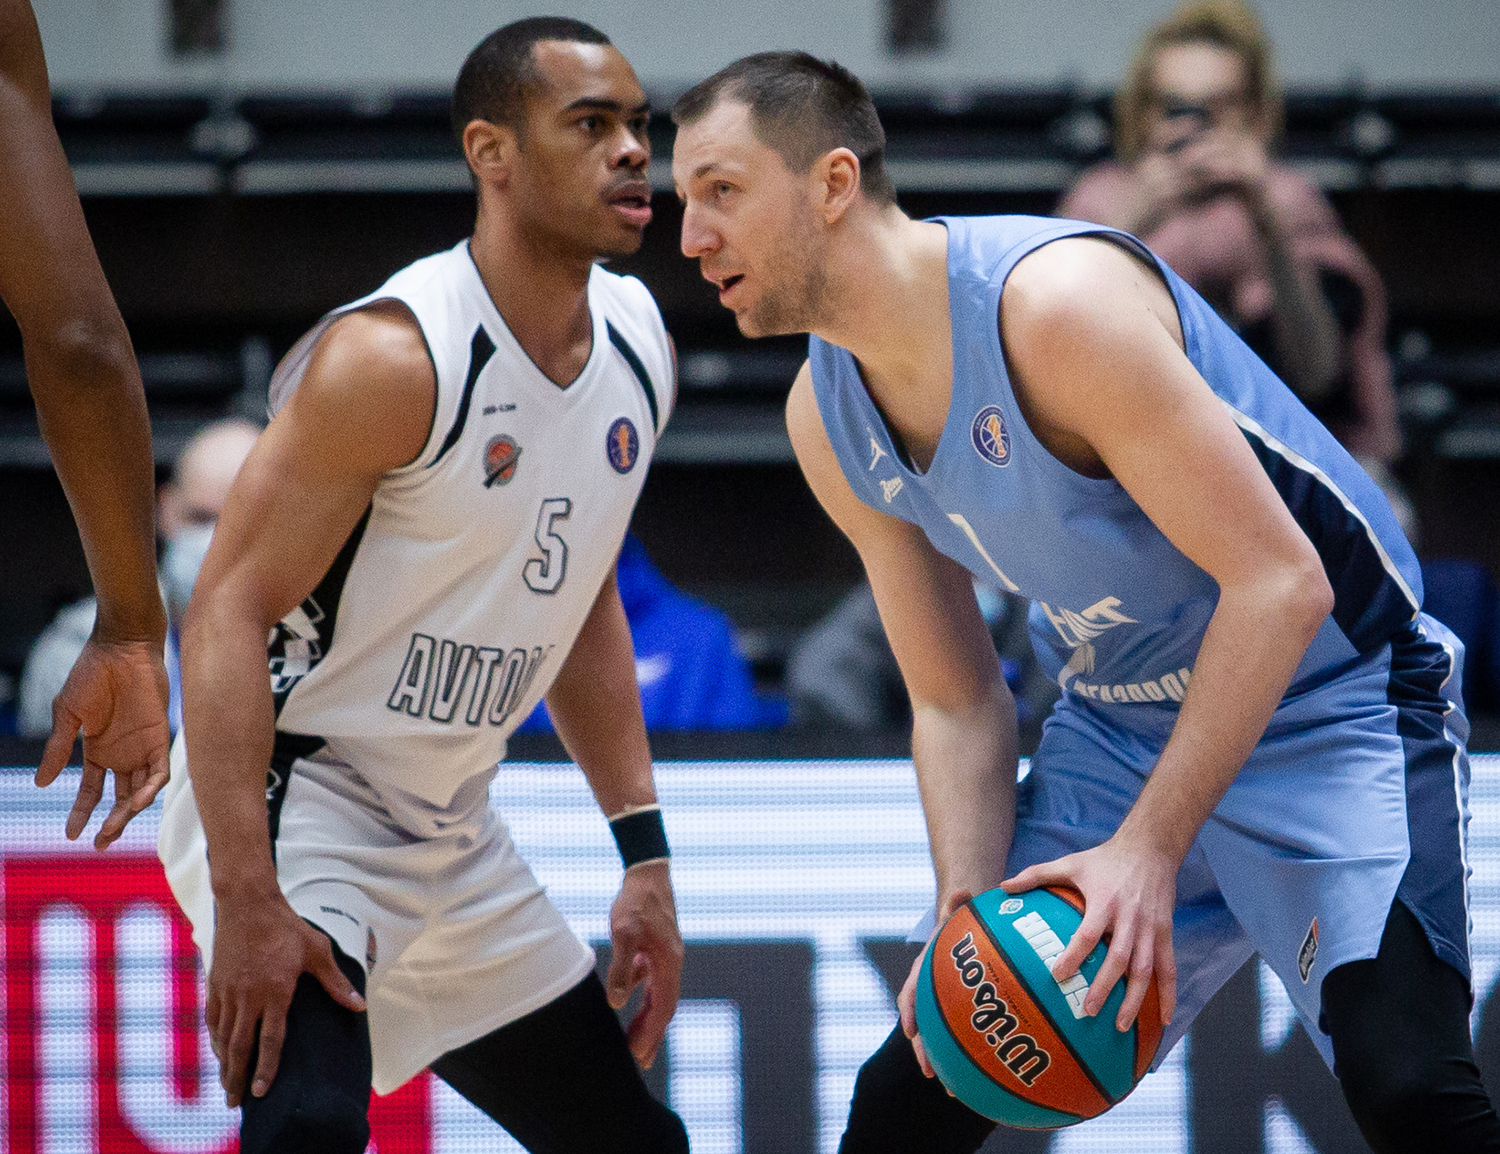 Zenit maintain the lead thanks to win over Avtodor